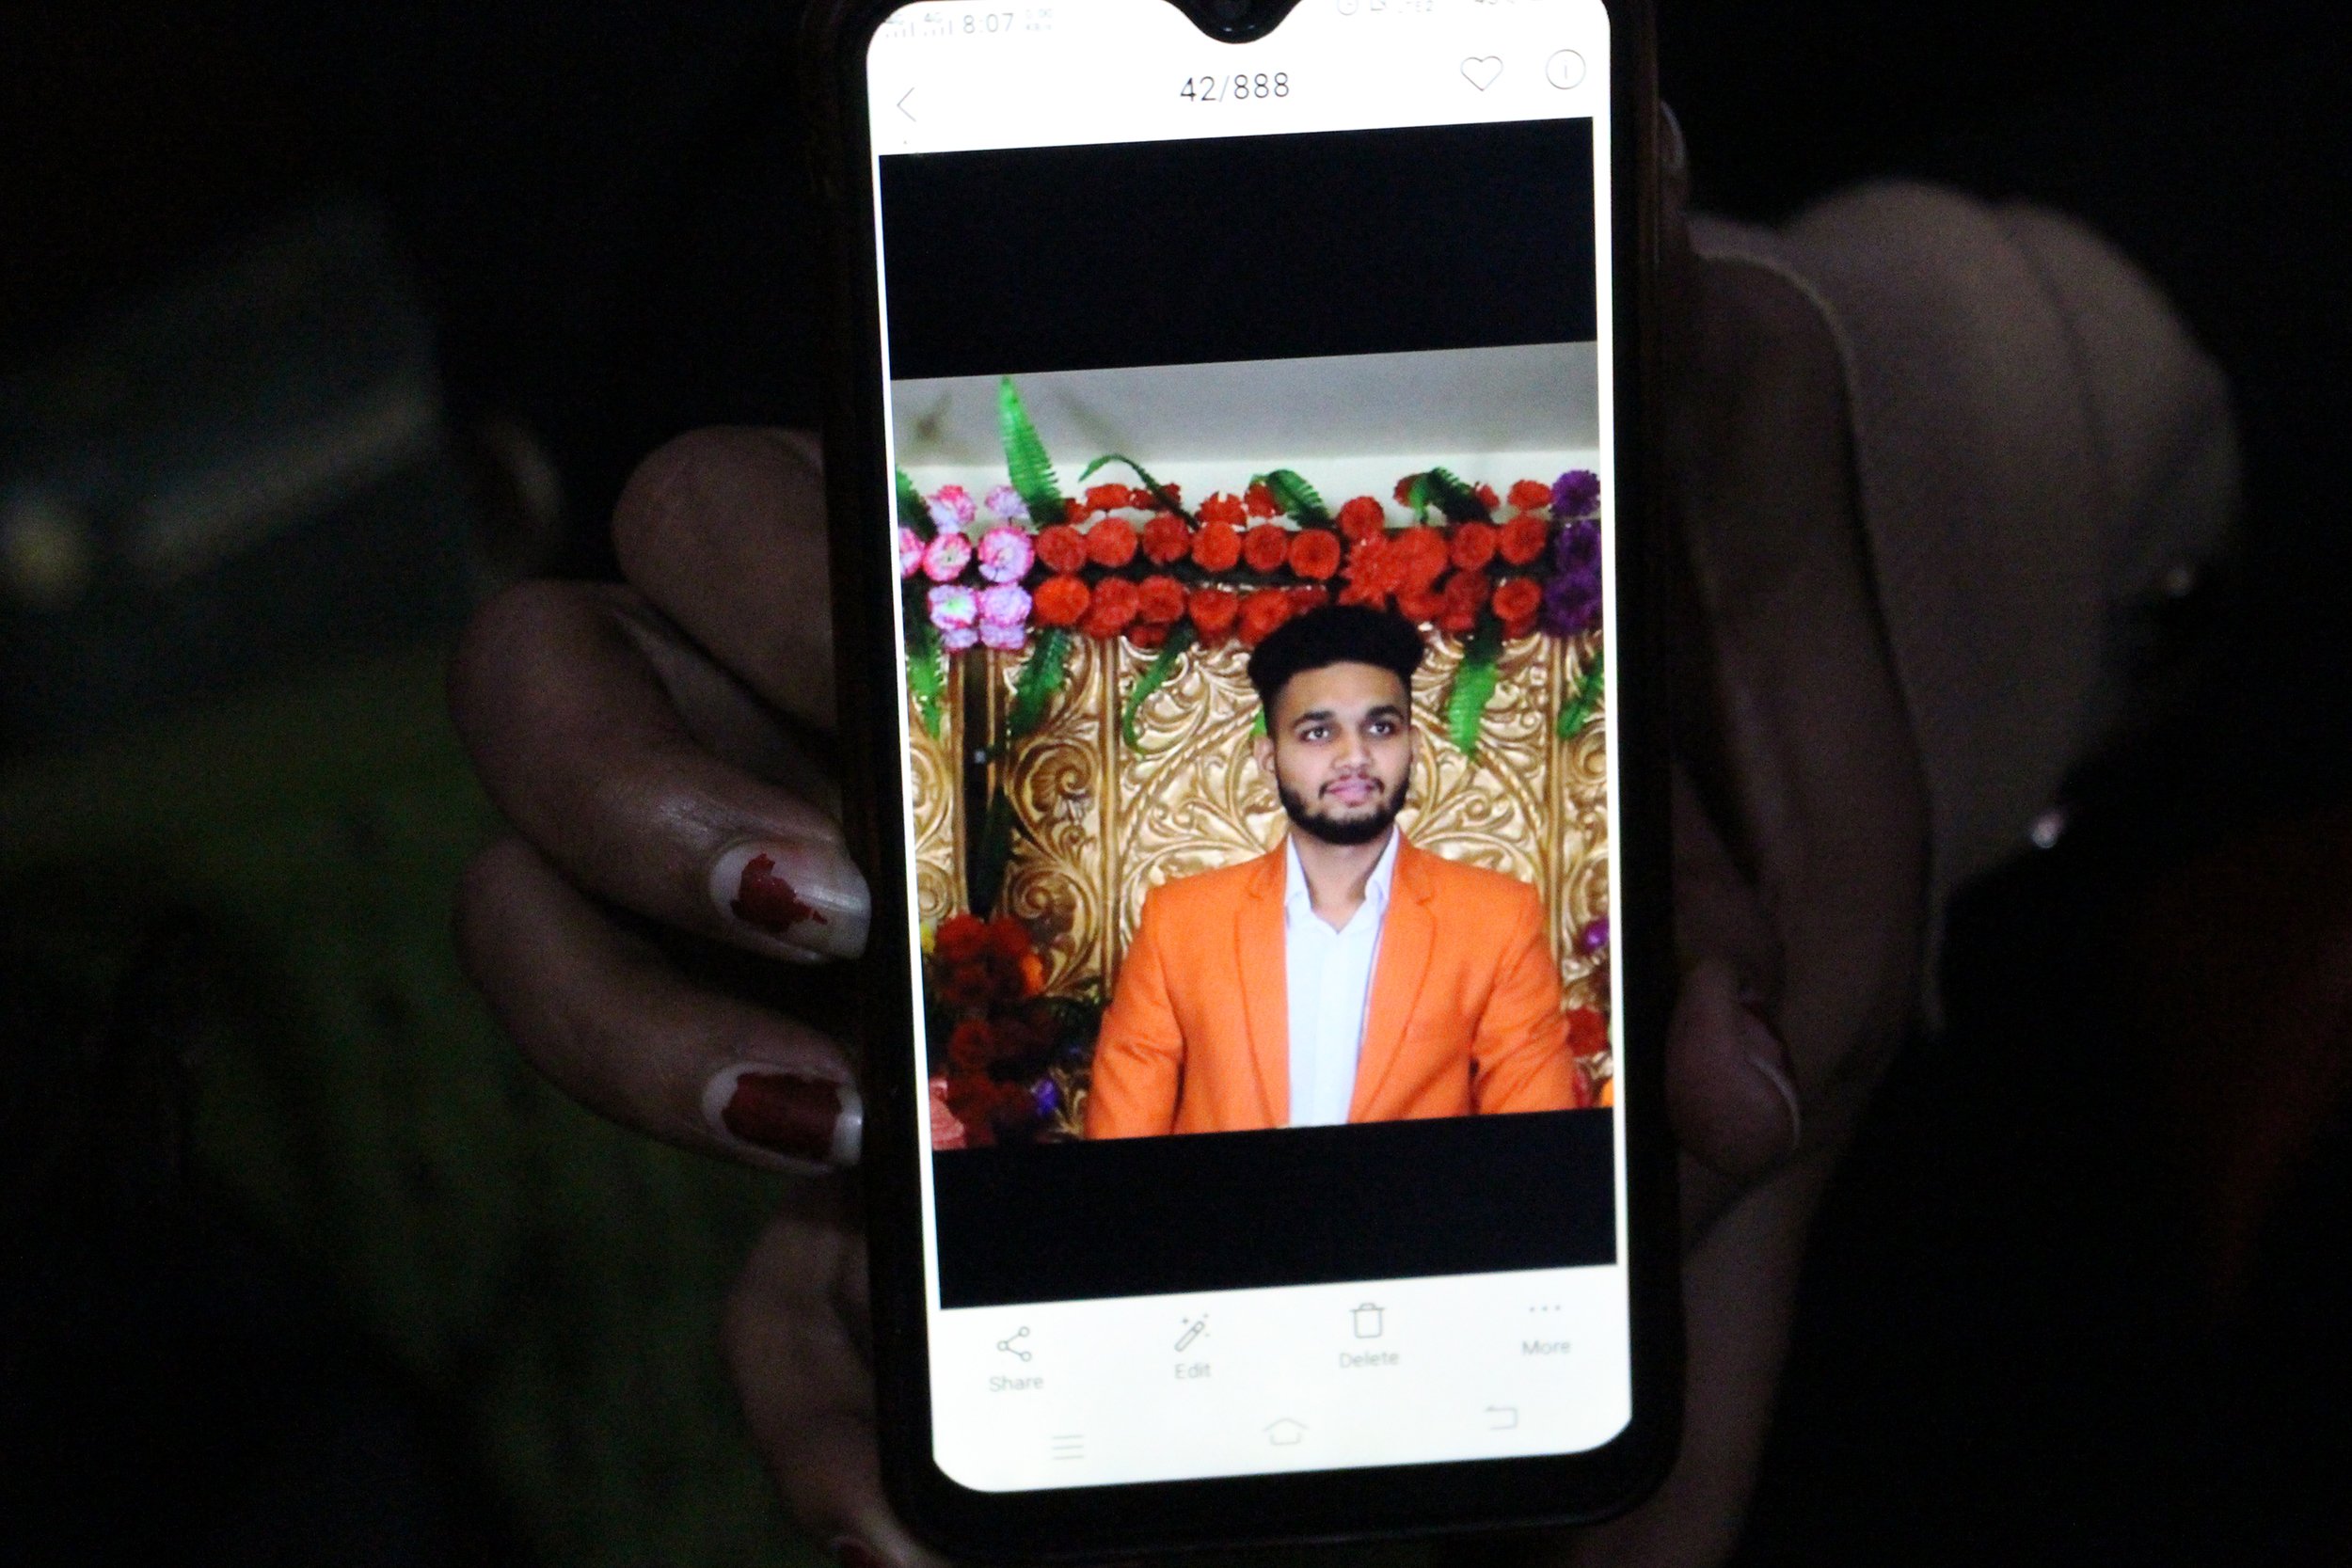  Anjali shows a photo of her future husband, who she is marrying the next day. She is lucky to have seen a photo beforehand, and though she is nervous, she thinks he is handsome. | Photo by Anna Kapsner 